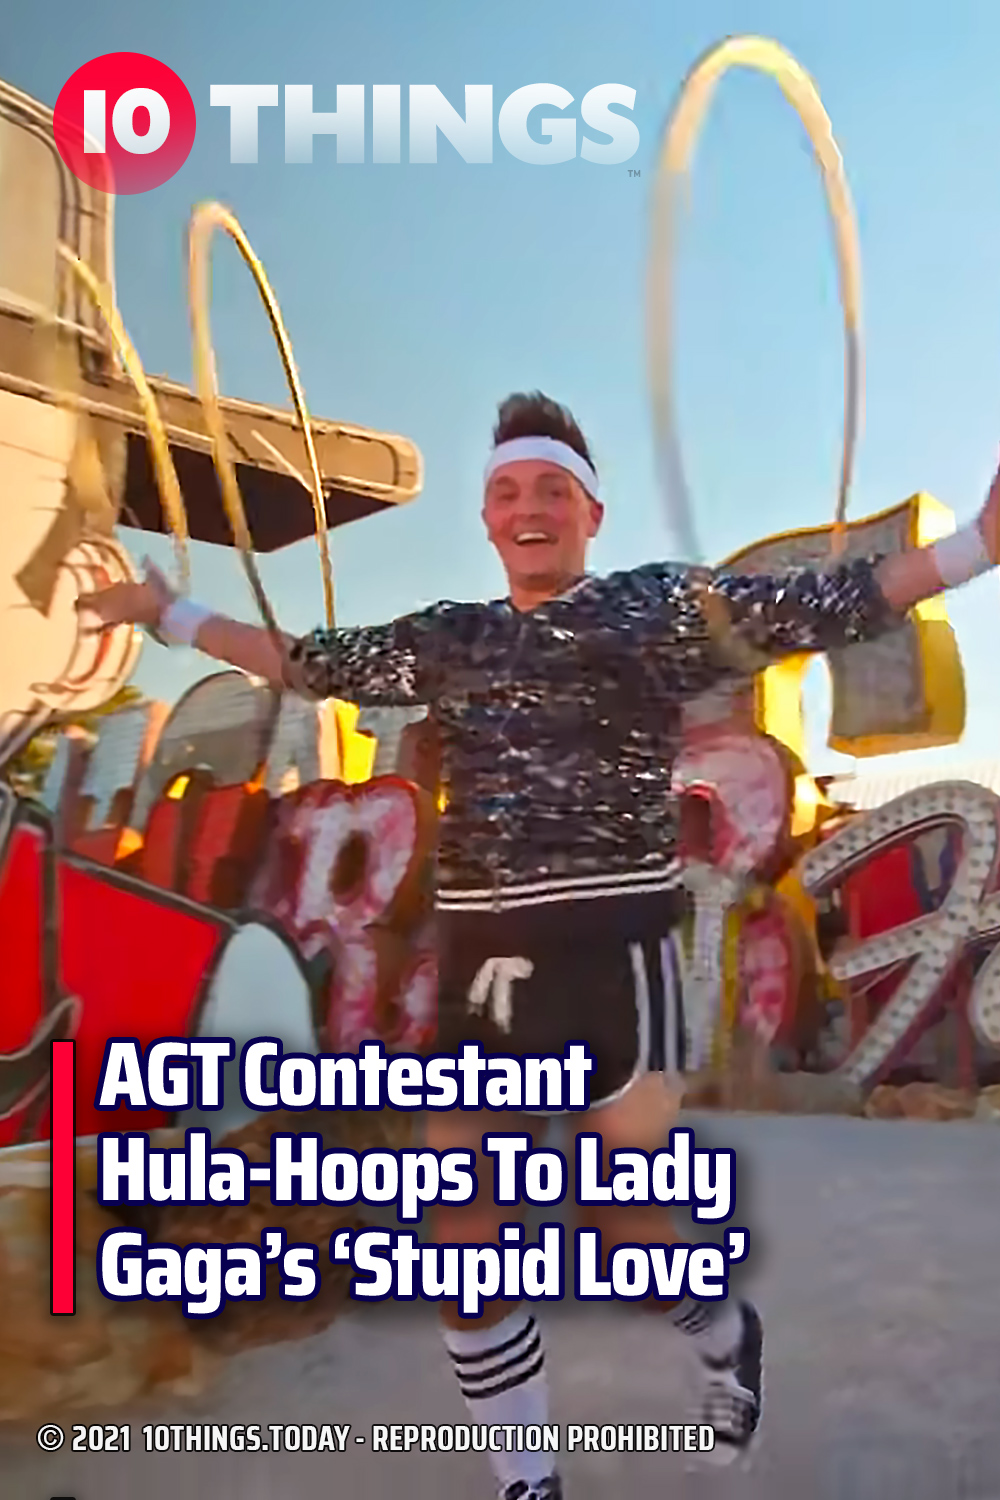 AGT Contestant Hula-Hoops To Lady Gaga’s ‘Stupid Love’